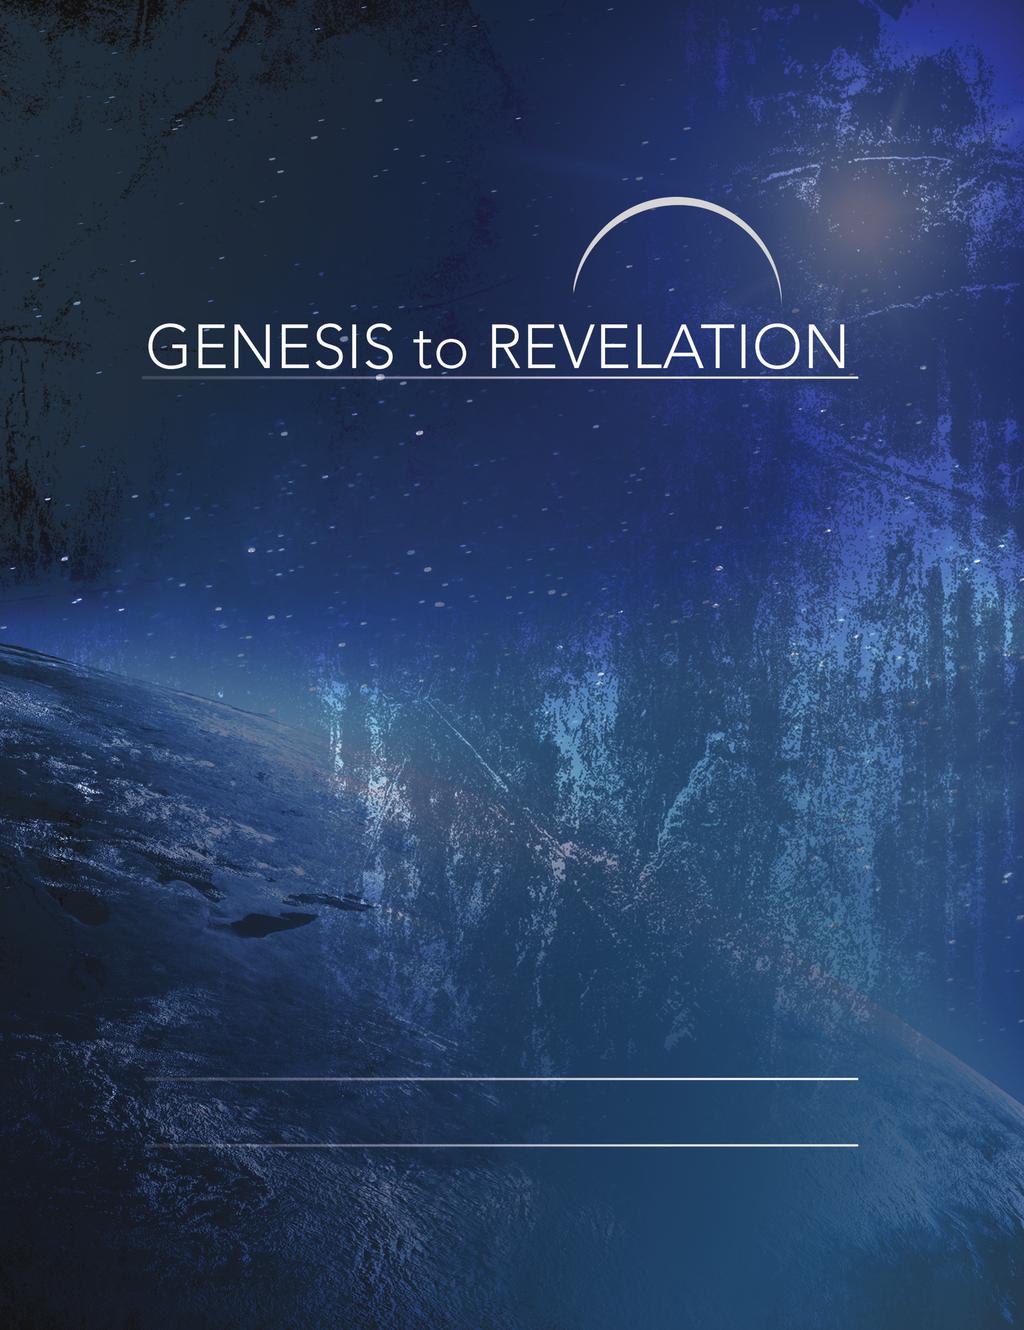 LEADER GENESIS A Comprehensive Verse-by-Verse Exploration of the Bible MORE THAN 3.5 MILLION COPIES OF THE SERIES SOLD.